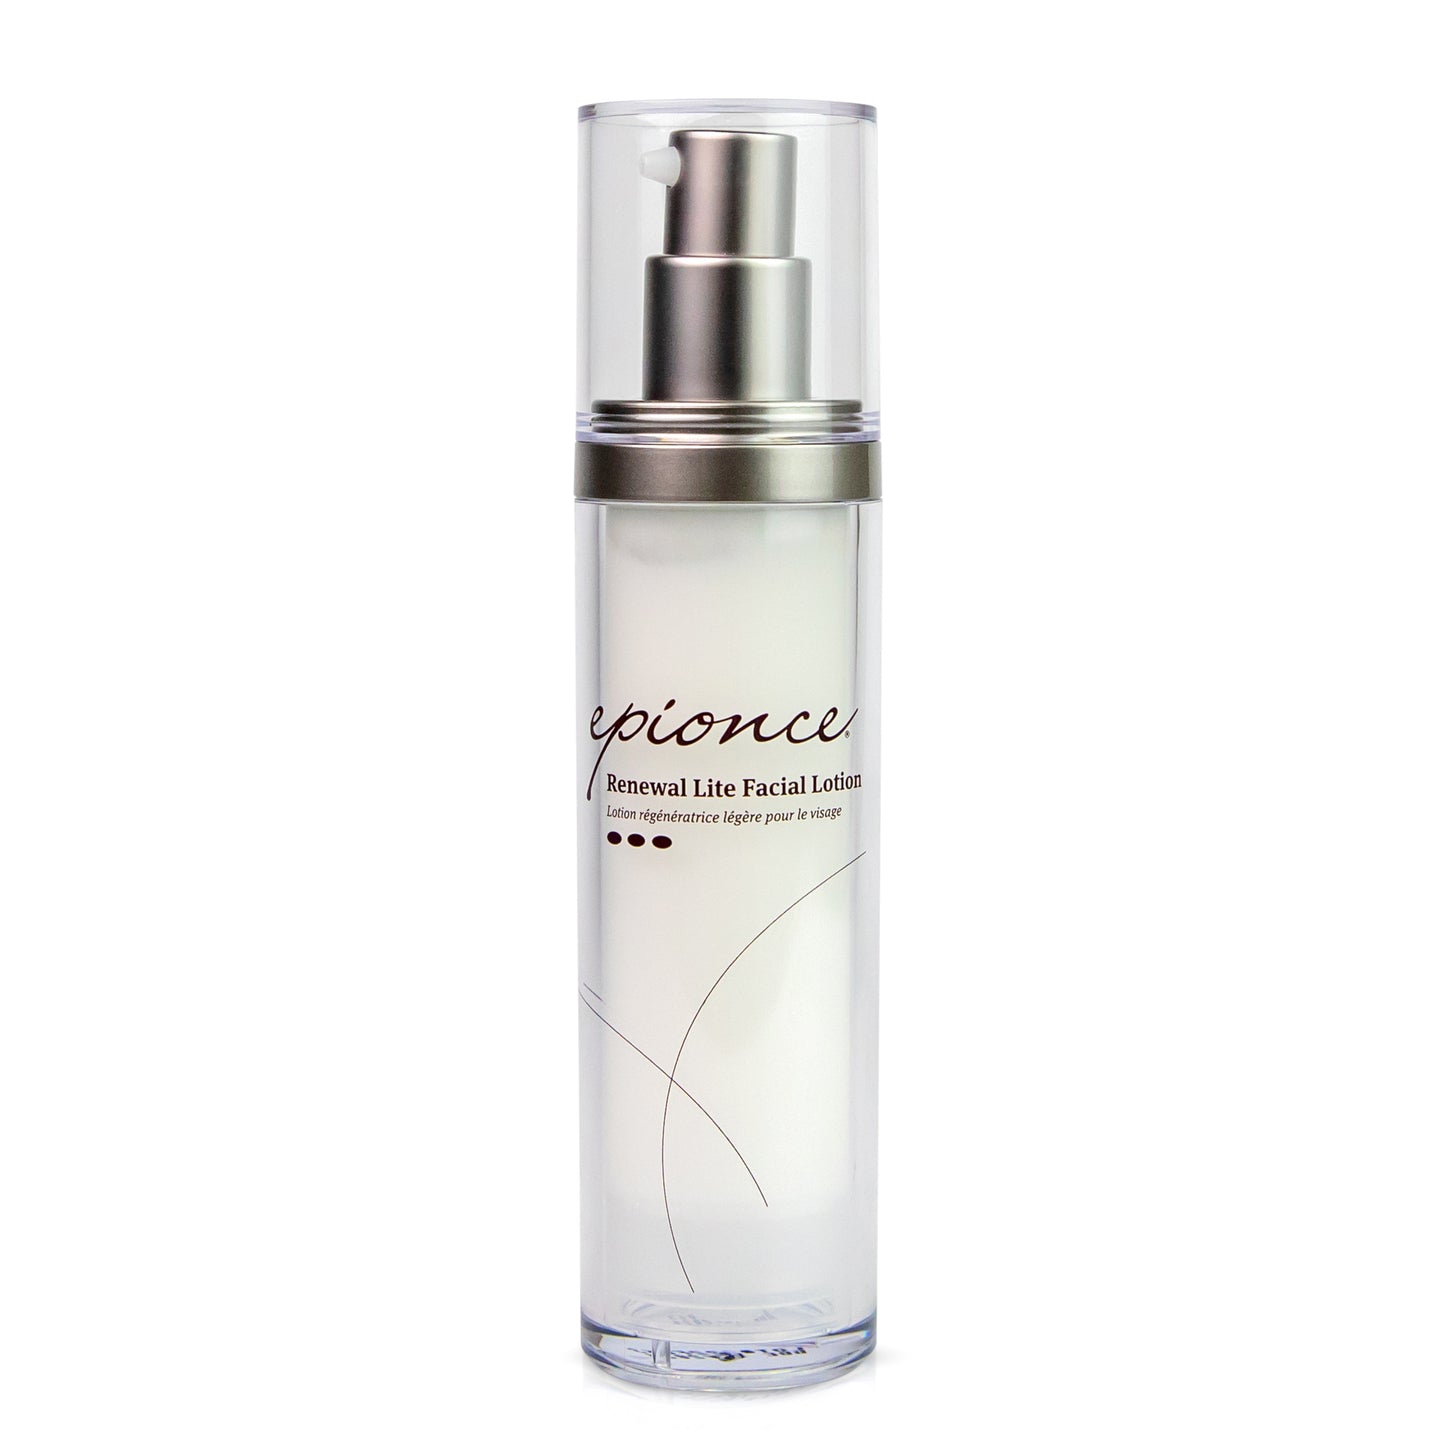 Epionce Renewal Lite Facial Lotion reduces appearance of fine lines and wrinkles